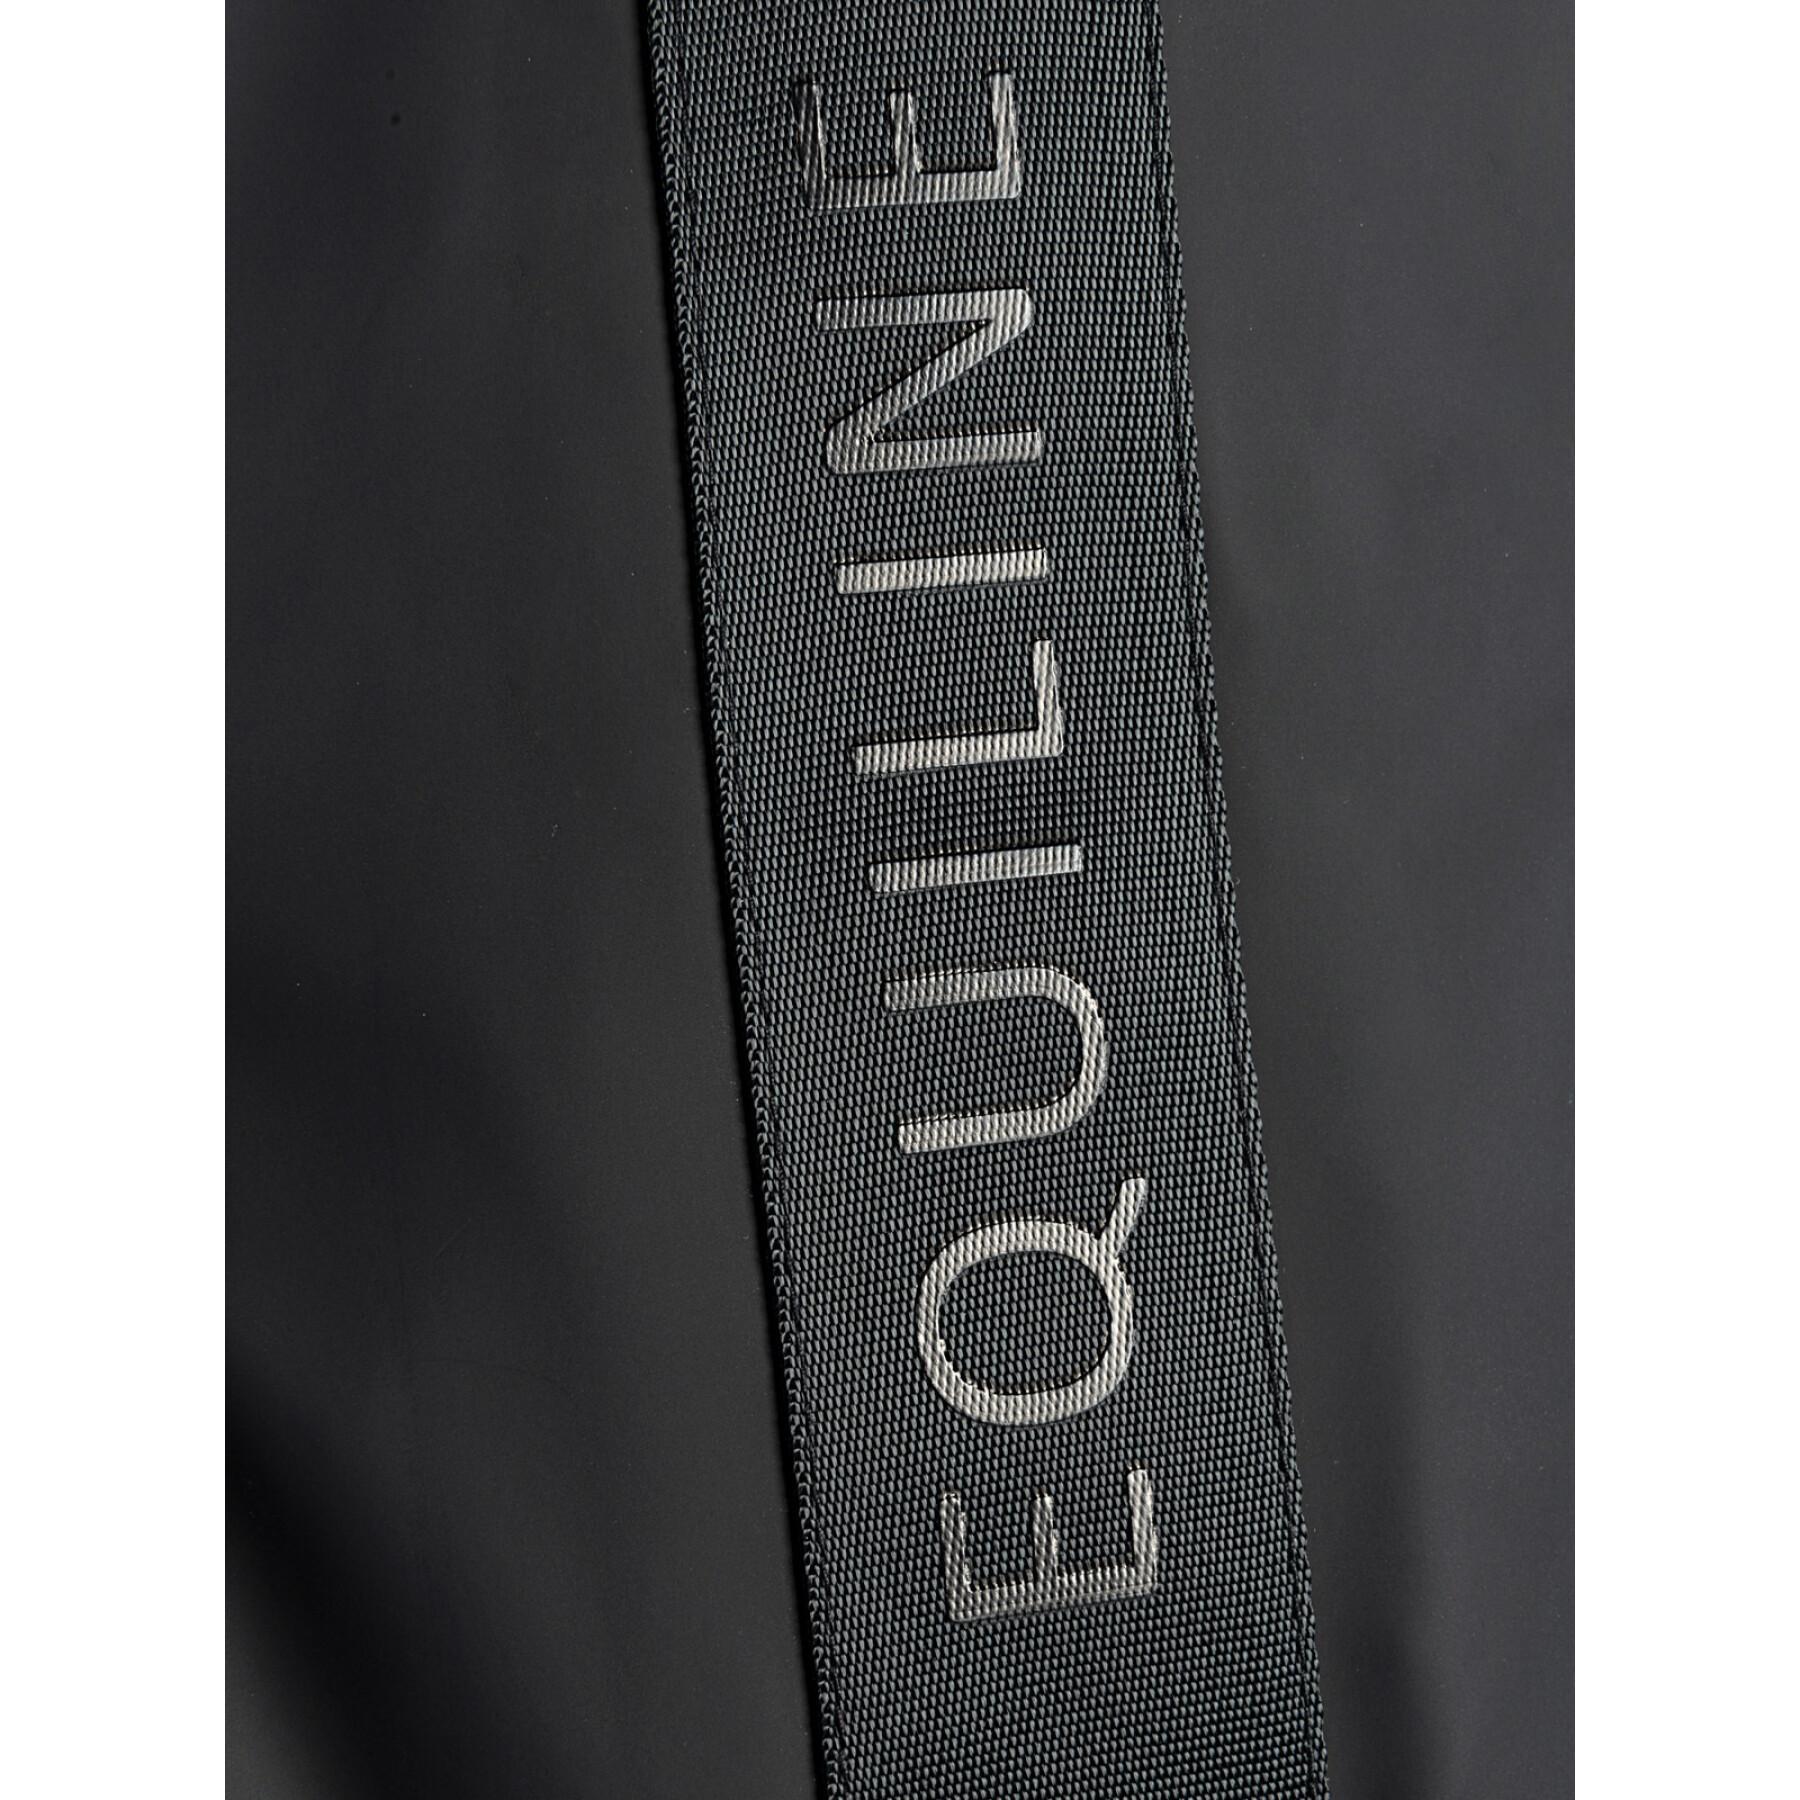 Riding boot bag Equiline Bark